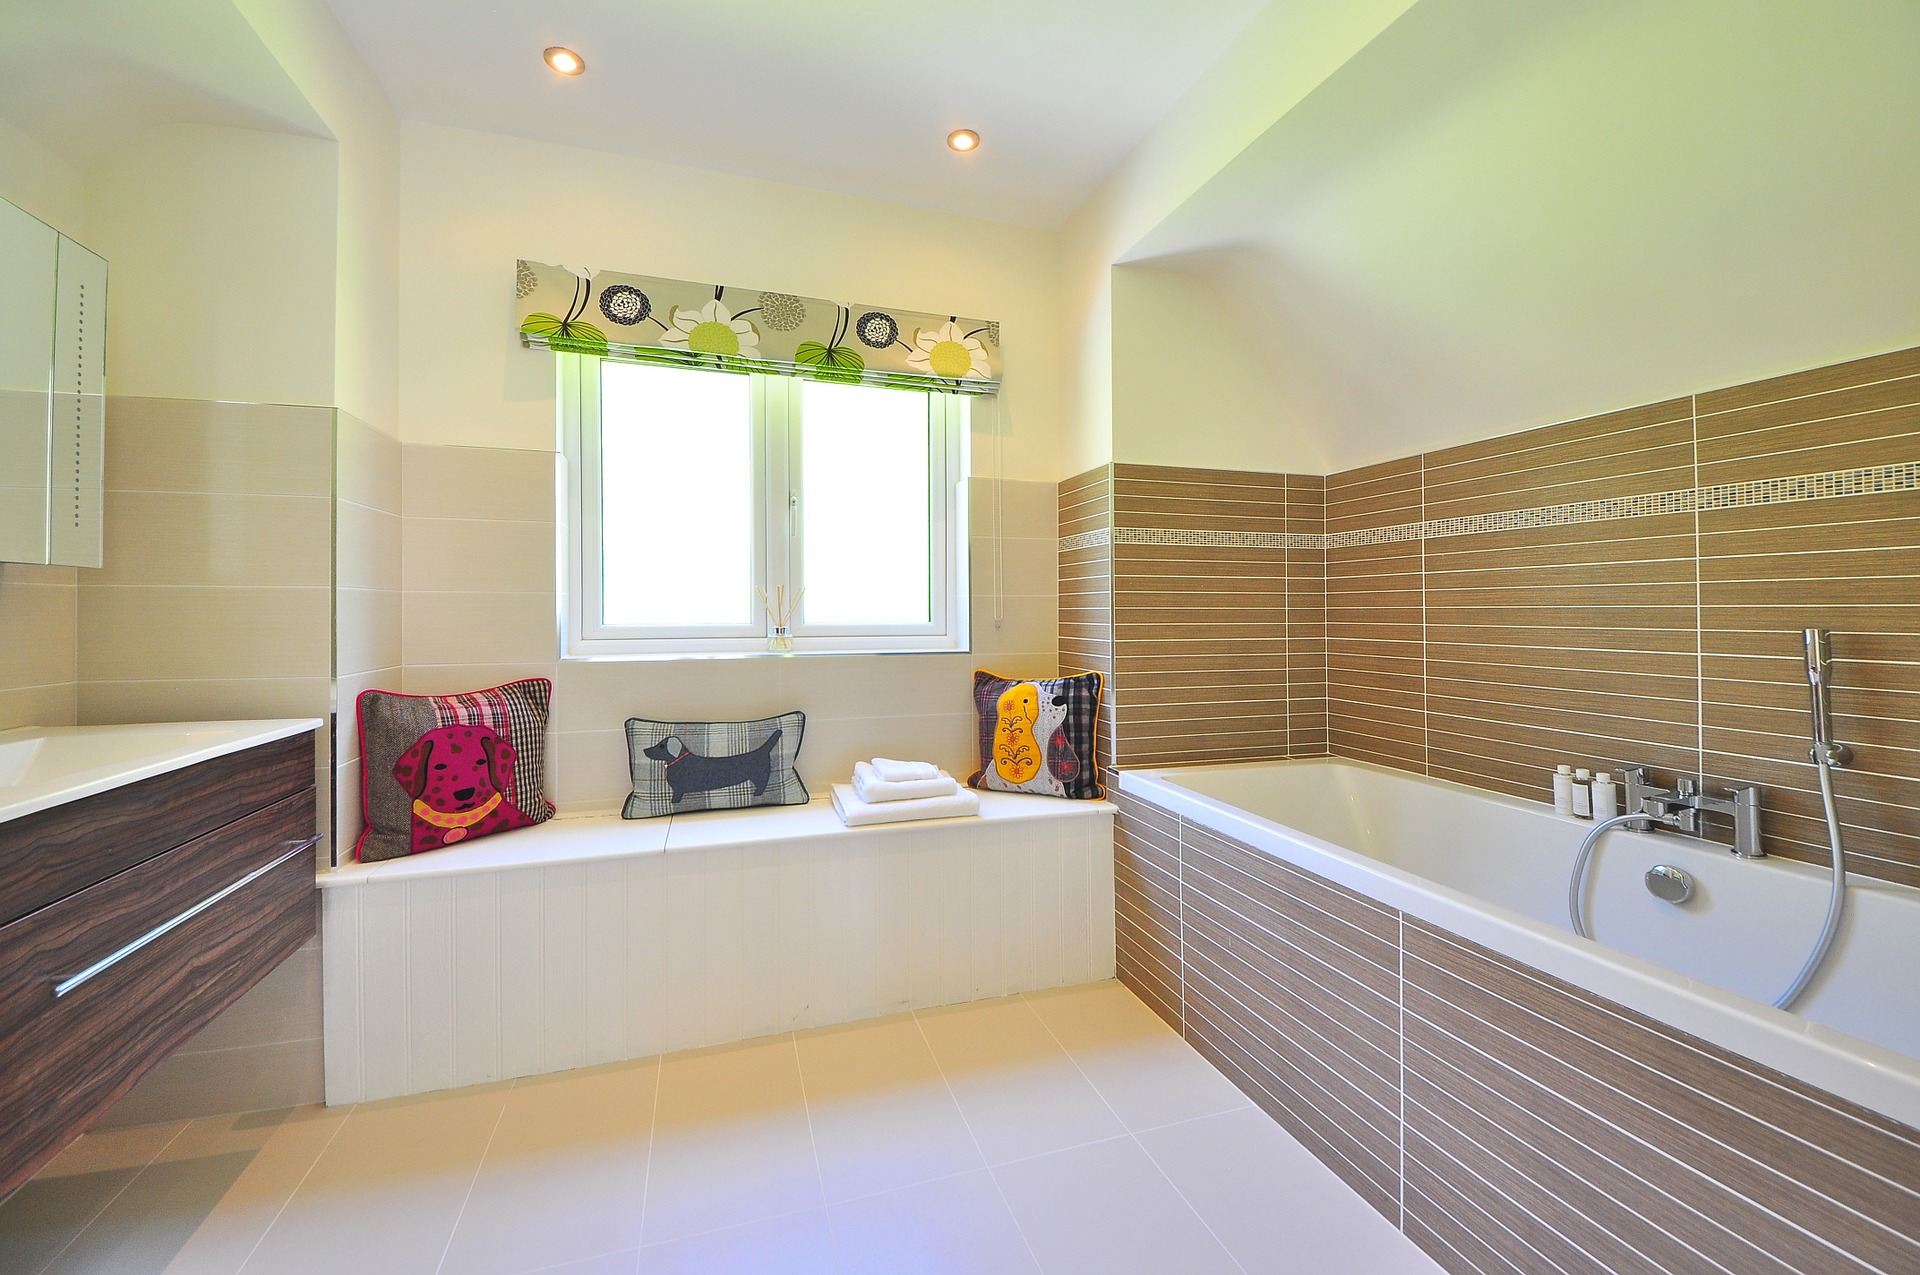 Hire Professional Bathroom Fitters For Luxurious And Attractive Bathroom